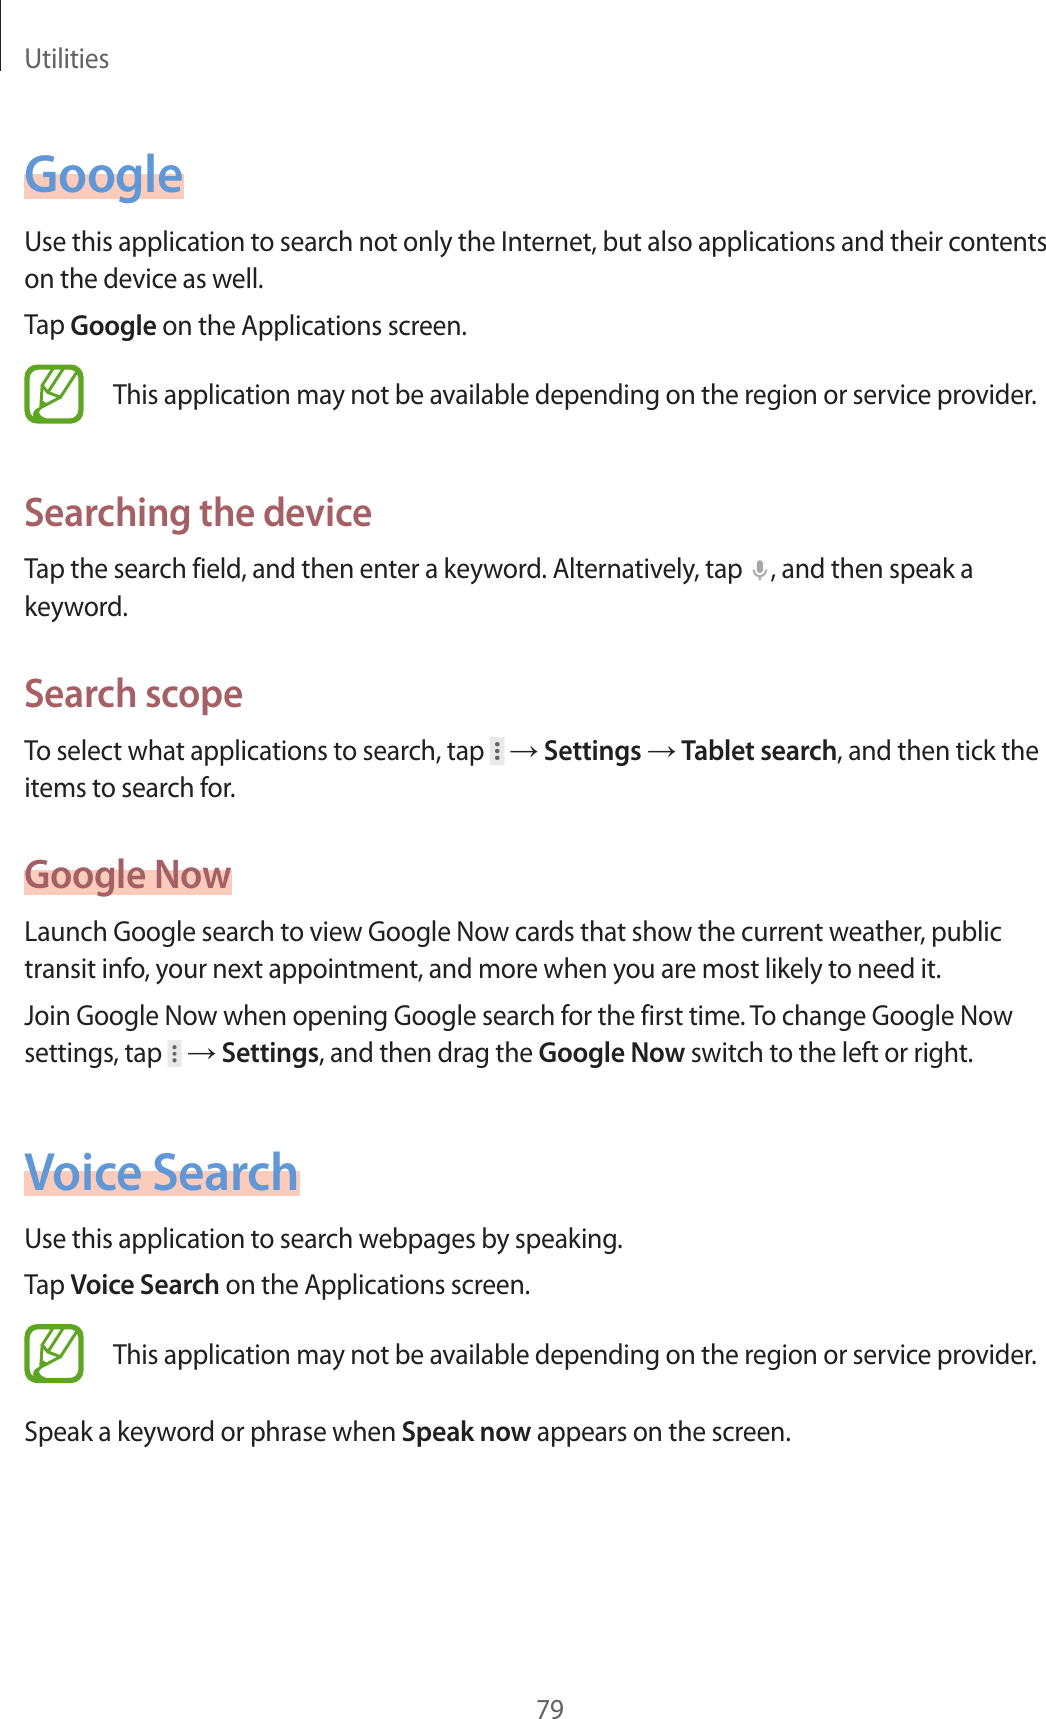 Utilities79GoogleUse this application to search not only the Internet, but also applications and their contents on the device as well.Tap Google on the Applications screen.This application may not be available depending on the region or service provider.Searching the deviceTap the search field, and then enter a keyword. Alternatively, tap  , and then speak a keyword.Search scopeTo select what applications to search, tap   → Settings → Tablet search, and then tick the items to search for.Google NowLaunch Google search to view Google Now cards that show the current weather, public transit info, your next appointment, and more when you are most likely to need it.Join Google Now when opening Google search for the first time. To change Google Now settings, tap   → Settings, and then drag the Google Now switch to the left or right.Voice SearchUse this application to search webpages by speaking.Tap Voice Search on the Applications screen.This application may not be available depending on the region or service provider.Speak a keyword or phrase when Speak now appears on the screen.